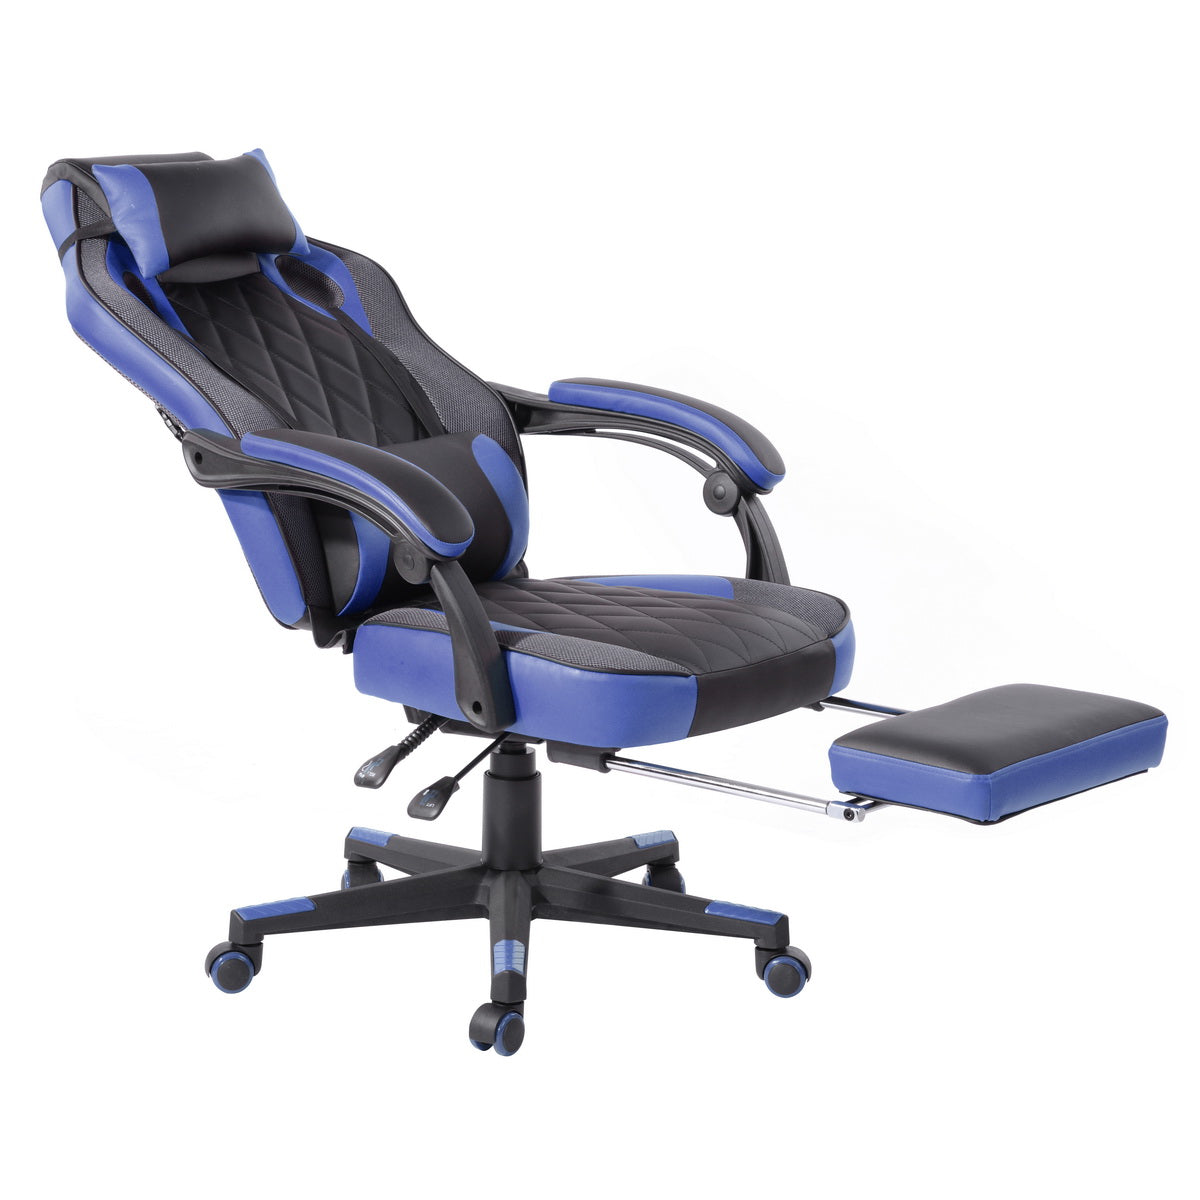 Padded PU Upholstery Foldable Armrest Gaming Chair, Burgendy Blue